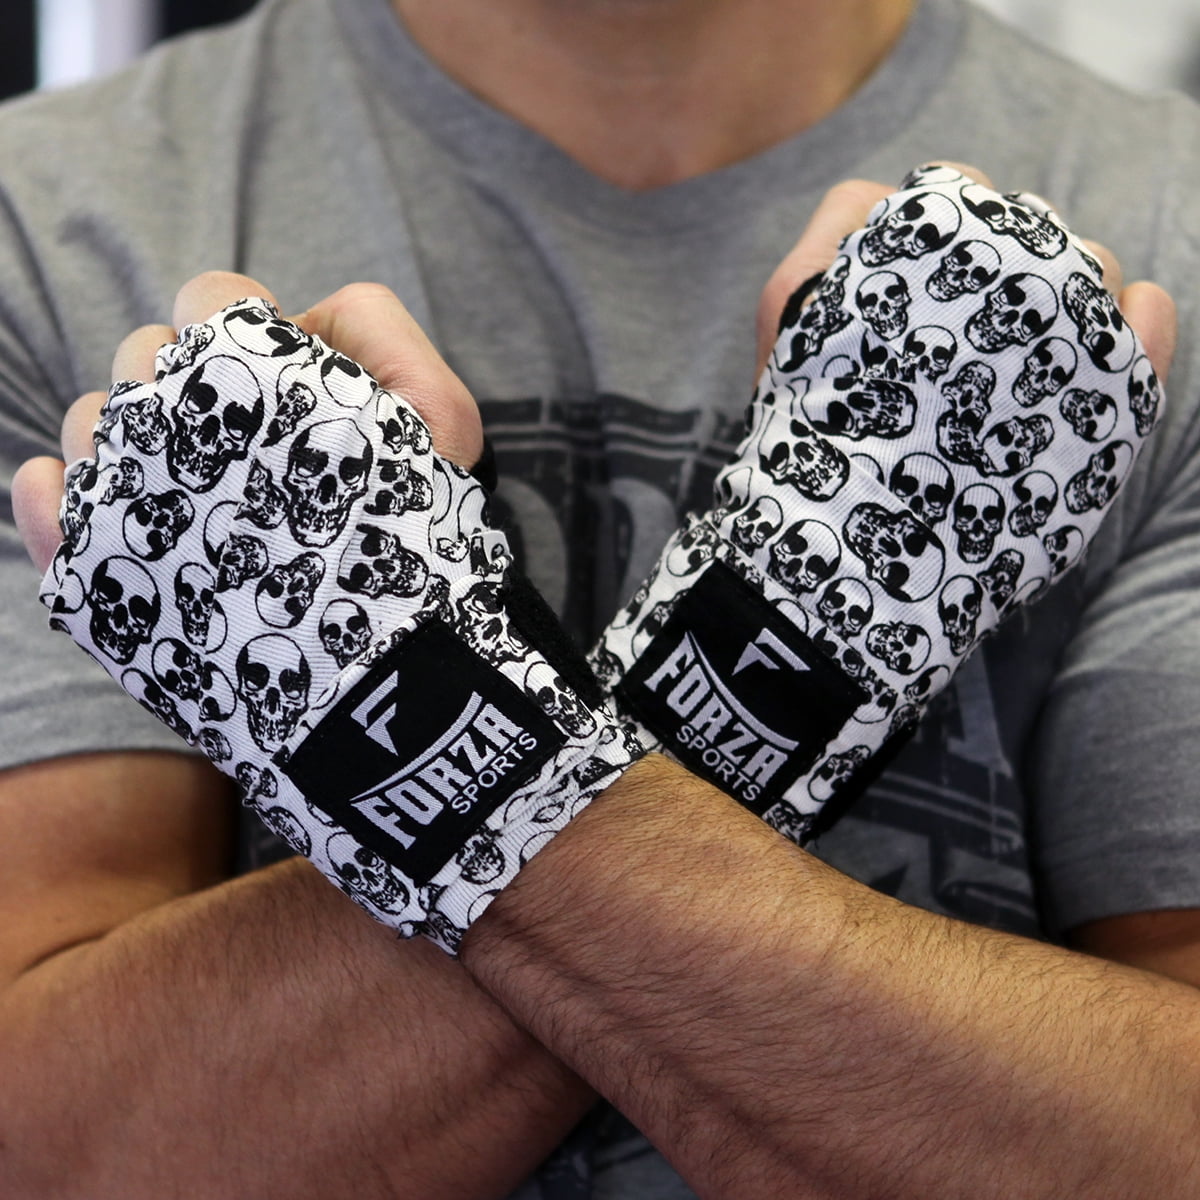 Forza Sports 180" Mexican Style Boxing and MMA Handwraps KTFO Gray 